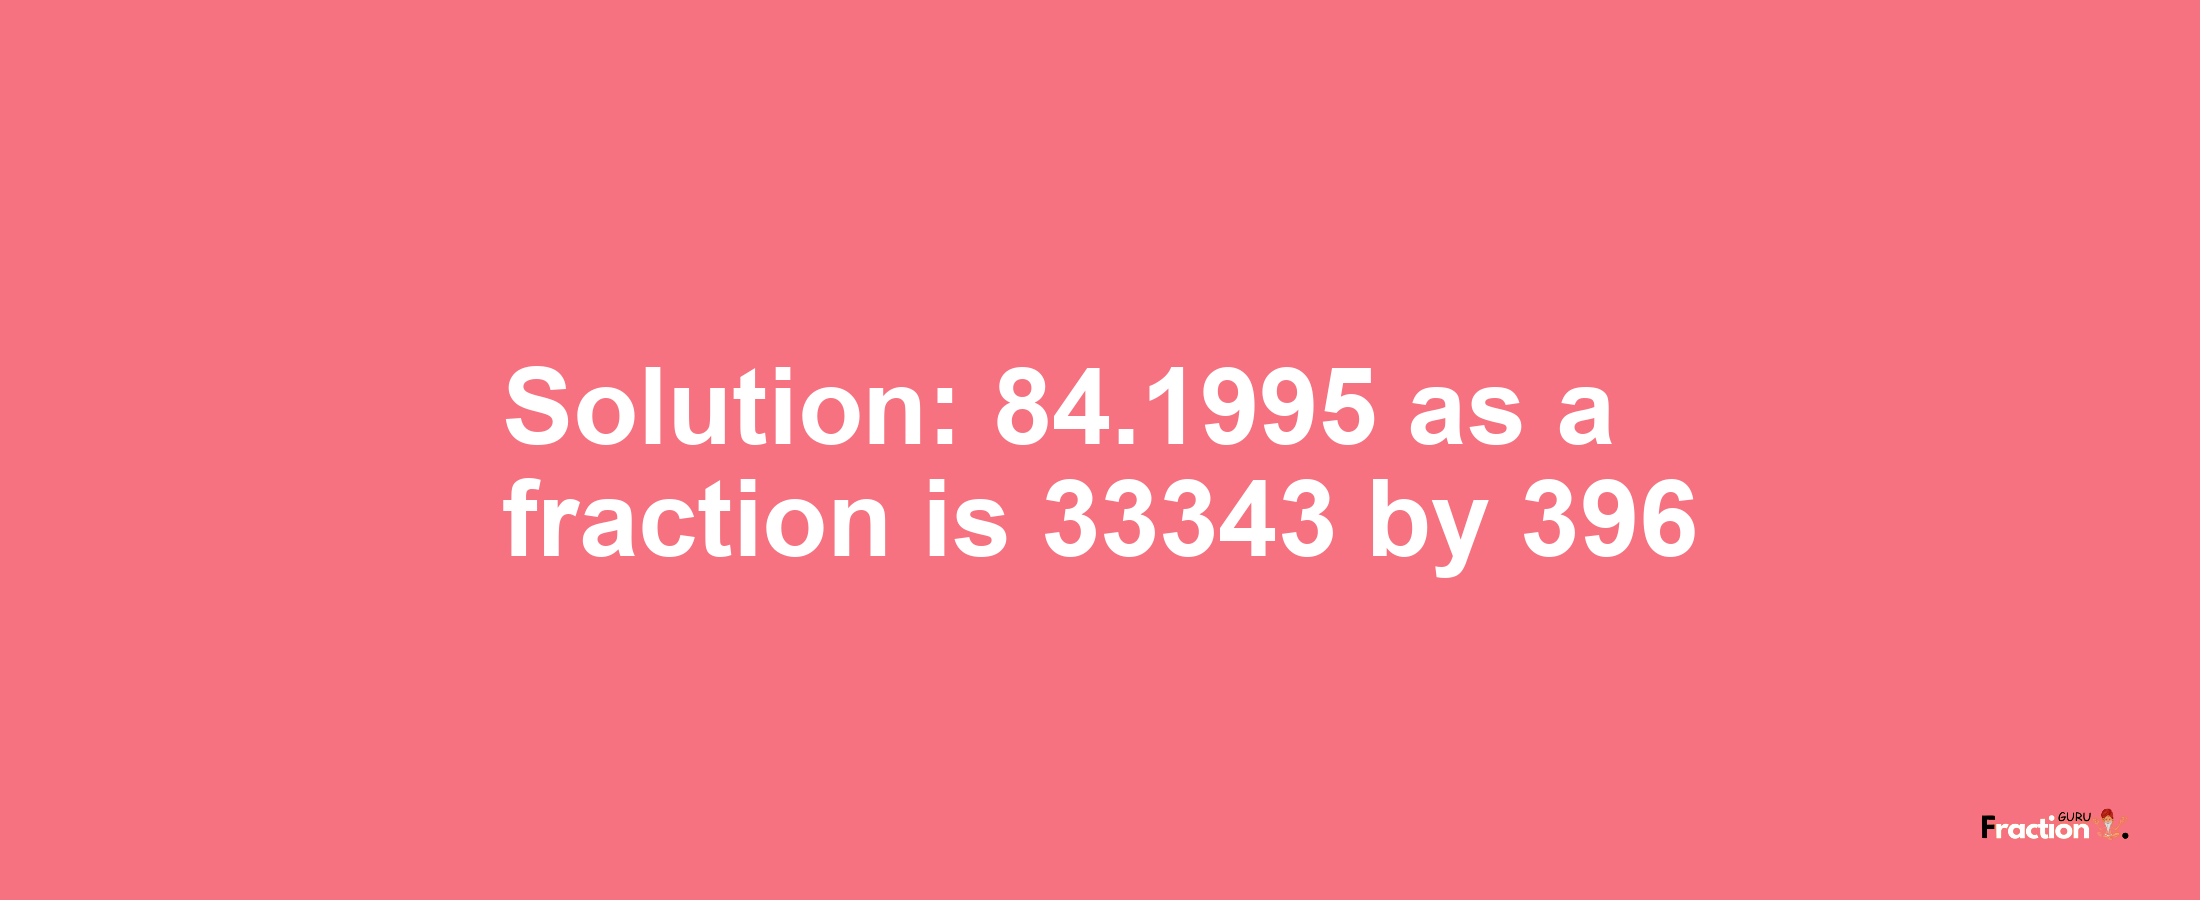 Solution:84.1995 as a fraction is 33343/396